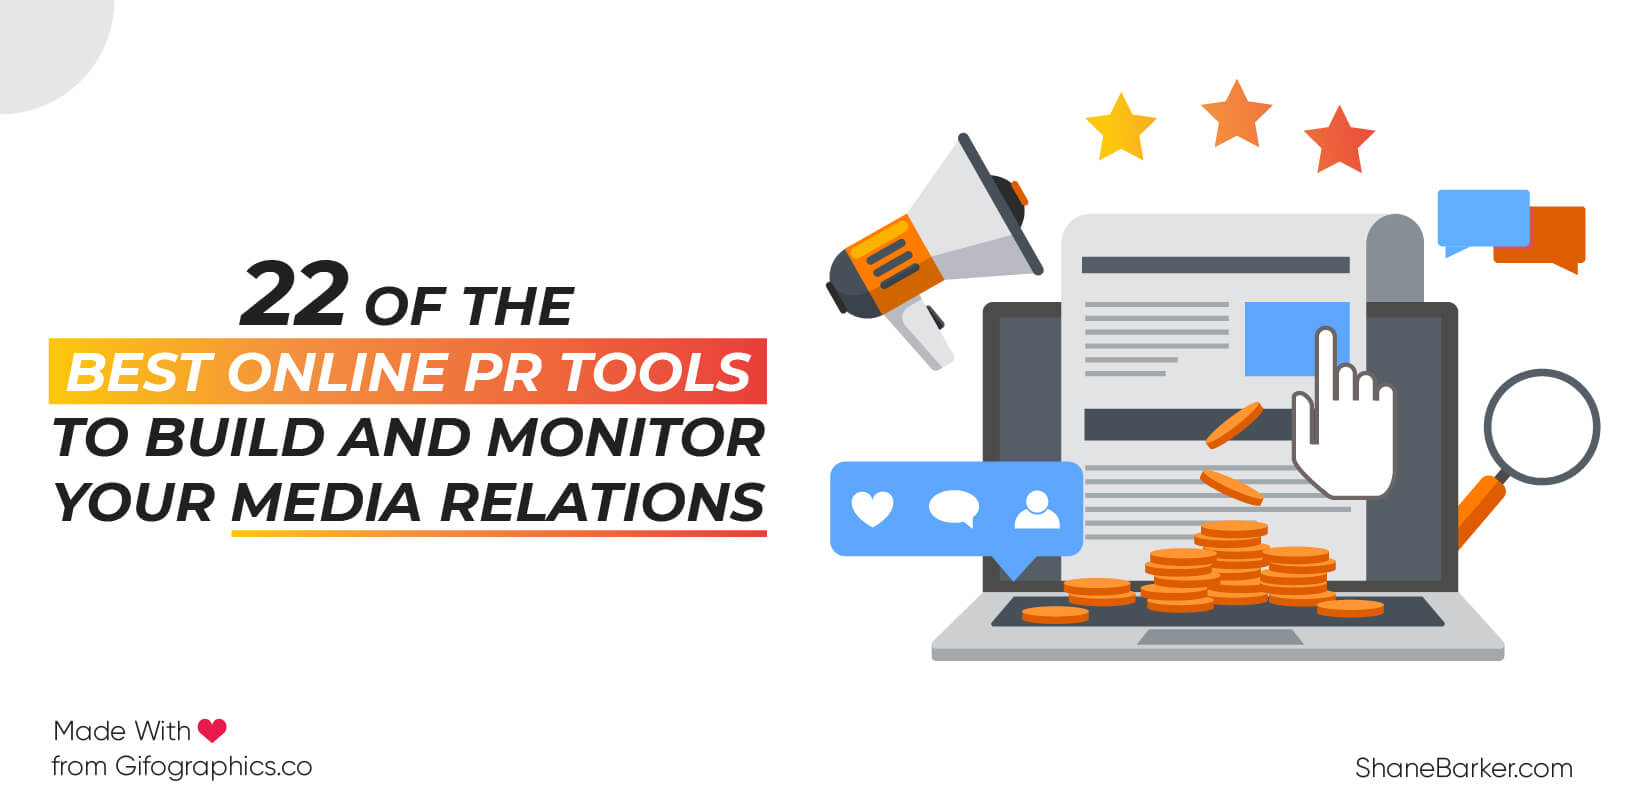 22 of the best online pr tools to build and monitor your media relations